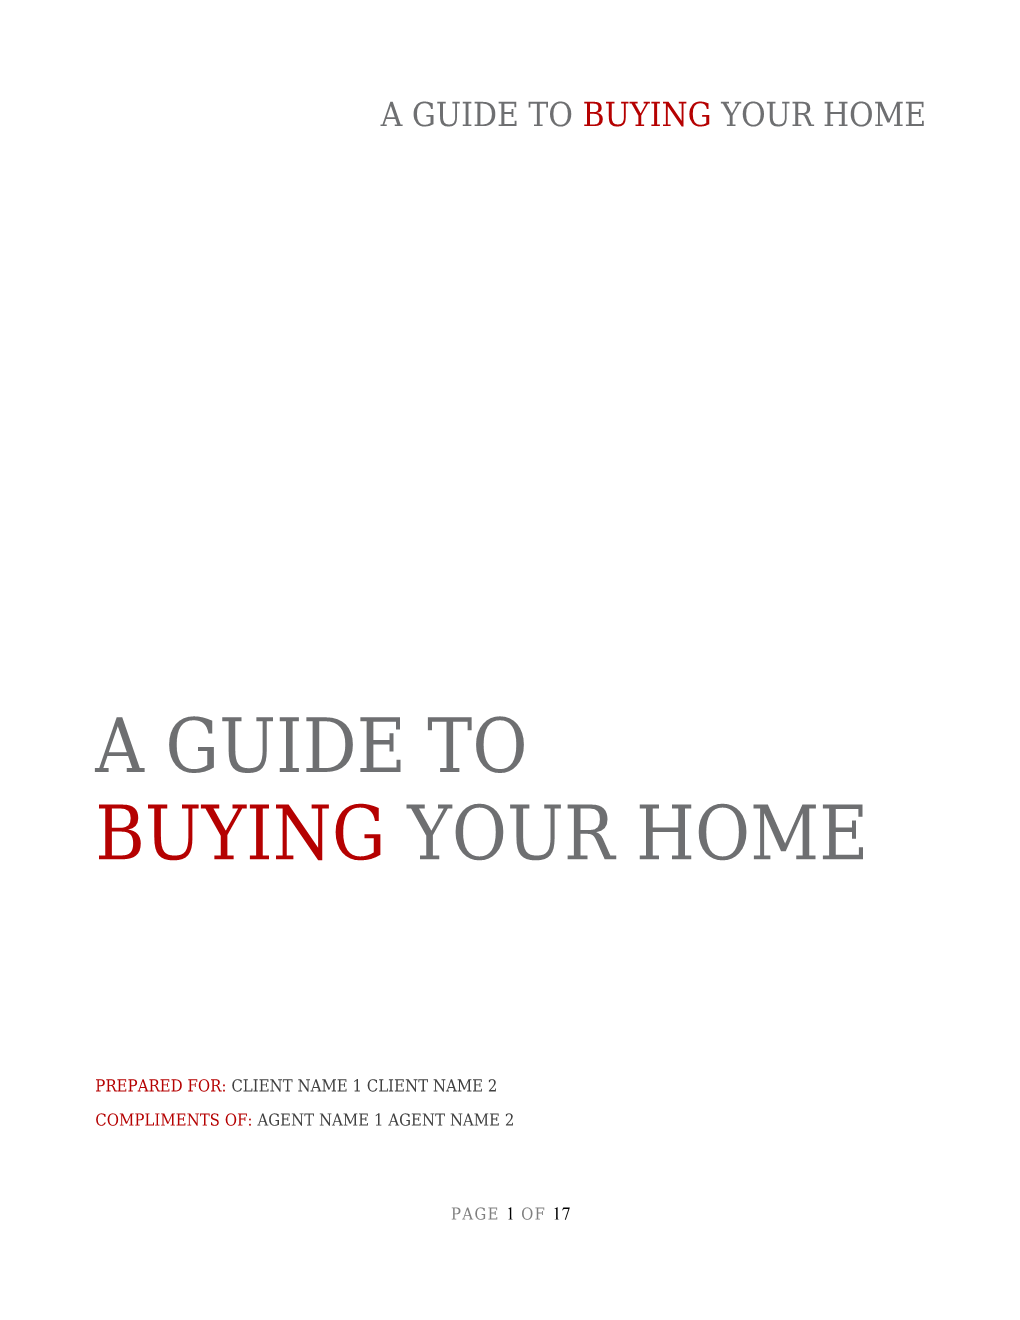 A Guide to Buying Your Home